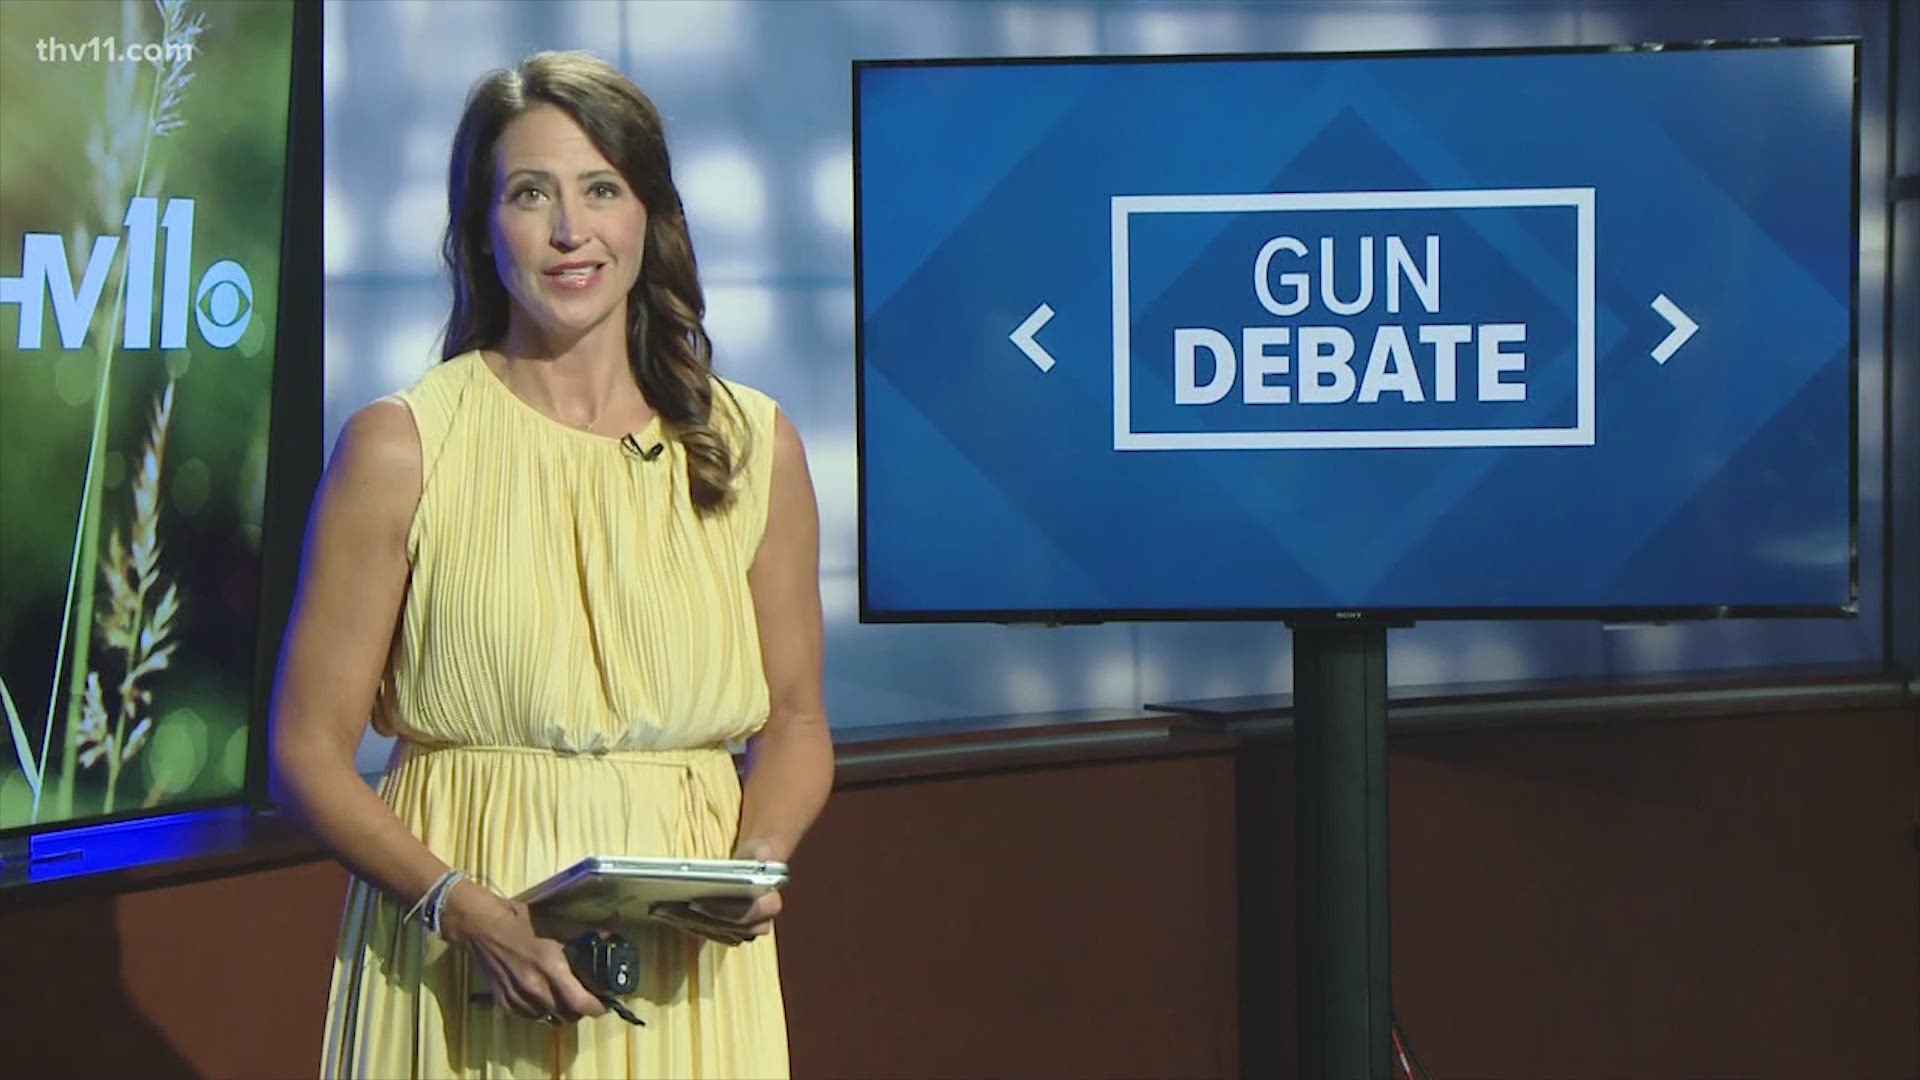 Dawn Scott sat down to talk about Walmart's decision to ask customers not to openly carry in its stores. Kroger has also decided to ask the same of its customers. 

What do you think of the decision? Let us know in the comments.